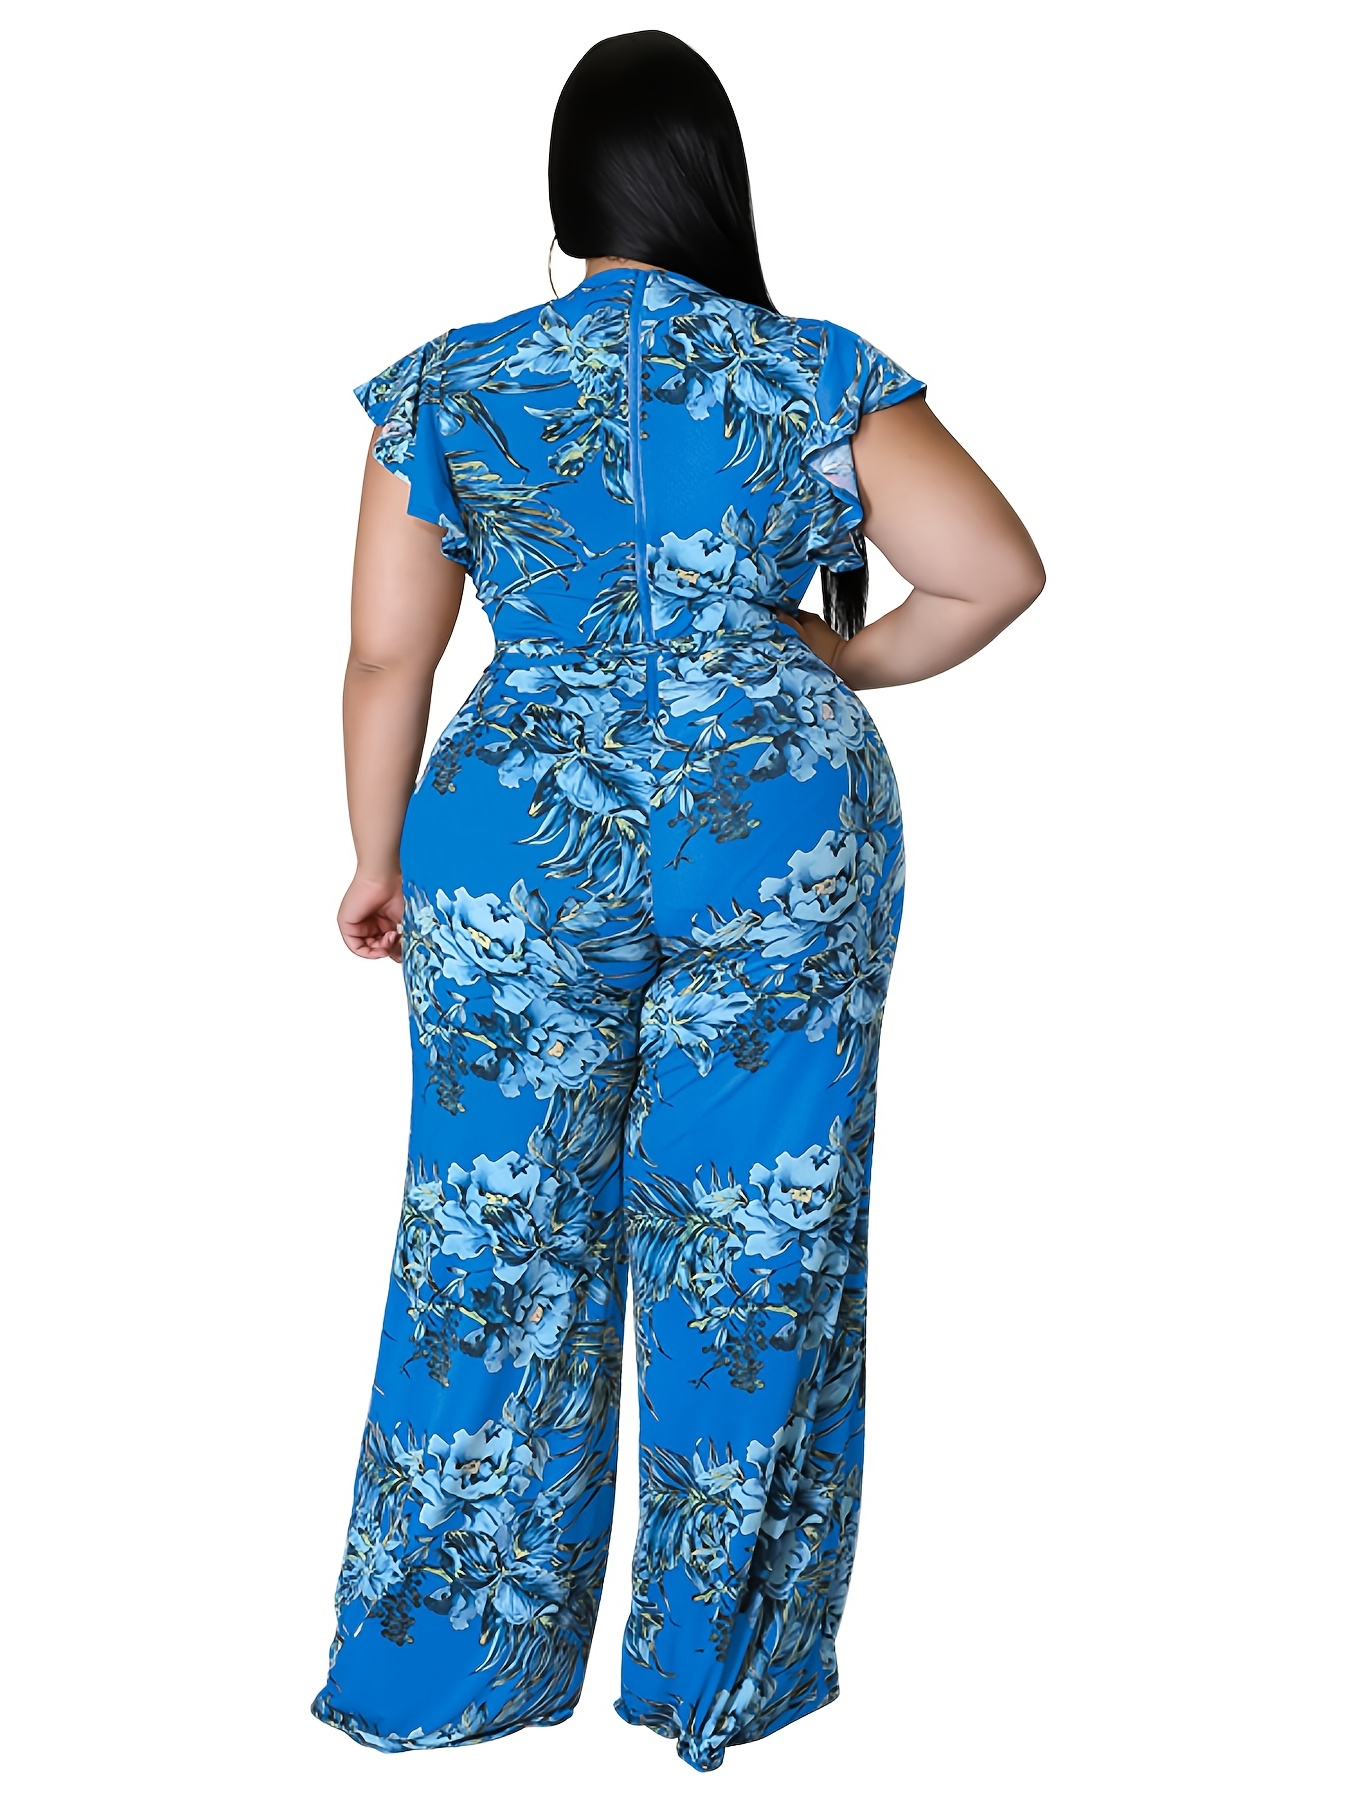 Whizmax Plus Size Casual Jumpsuits for Women Outfits Tie Belt Bell Sleeve  Smocked Beach Wide Leg Floral Jumpsuits